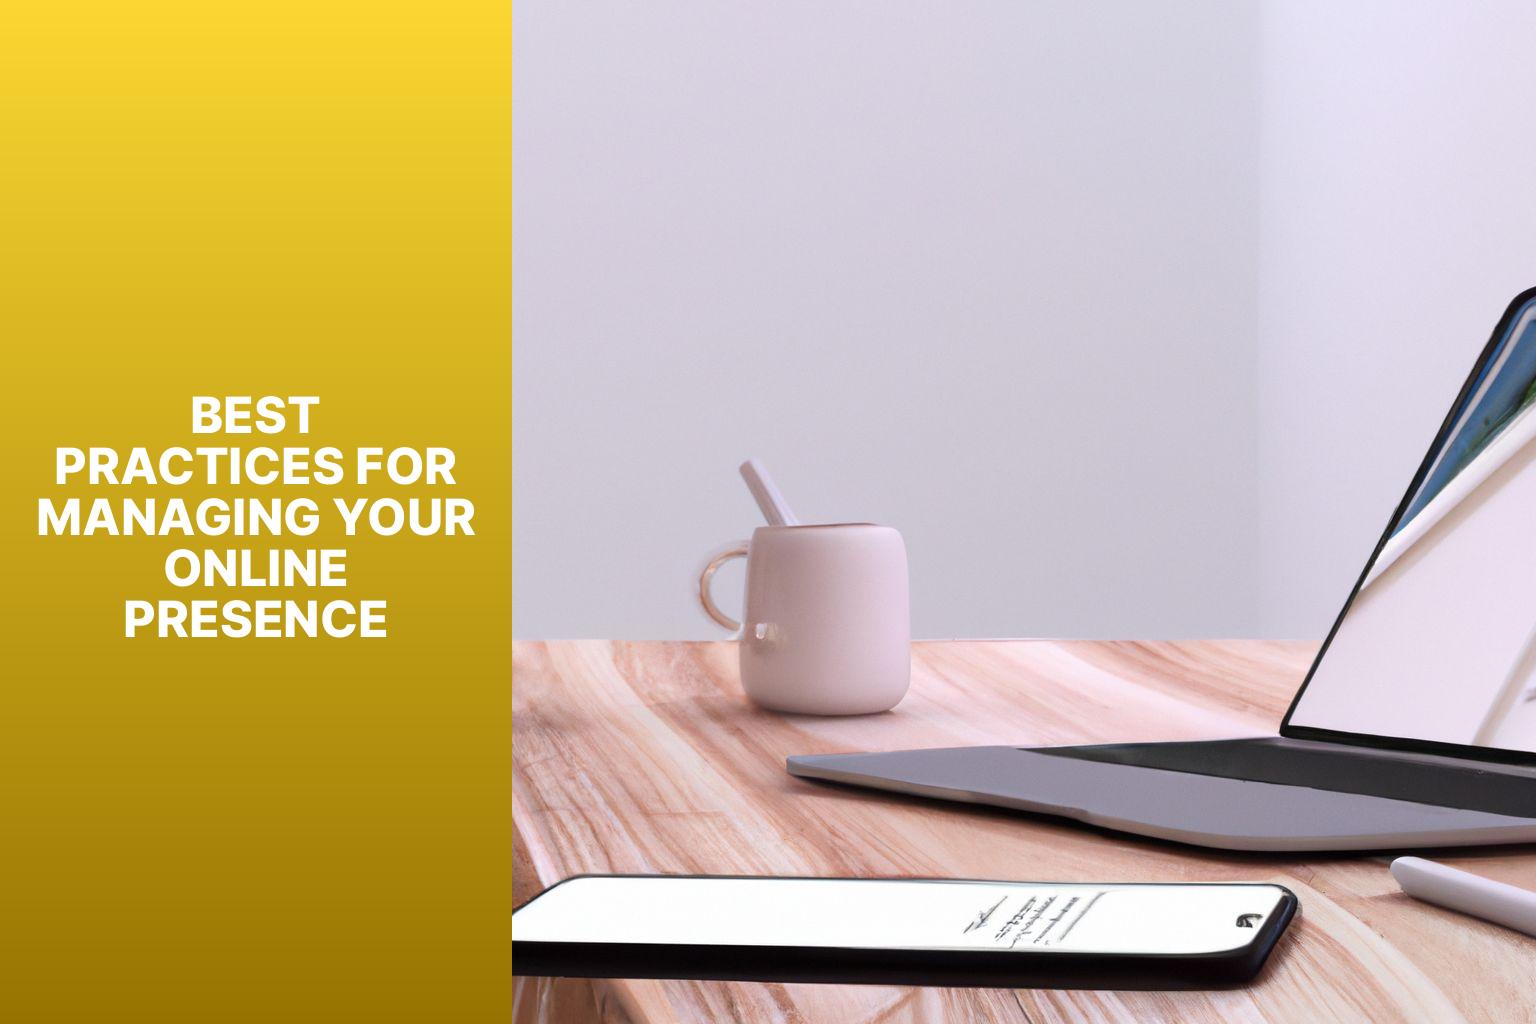 Best Practices for Managing Your Online Presence